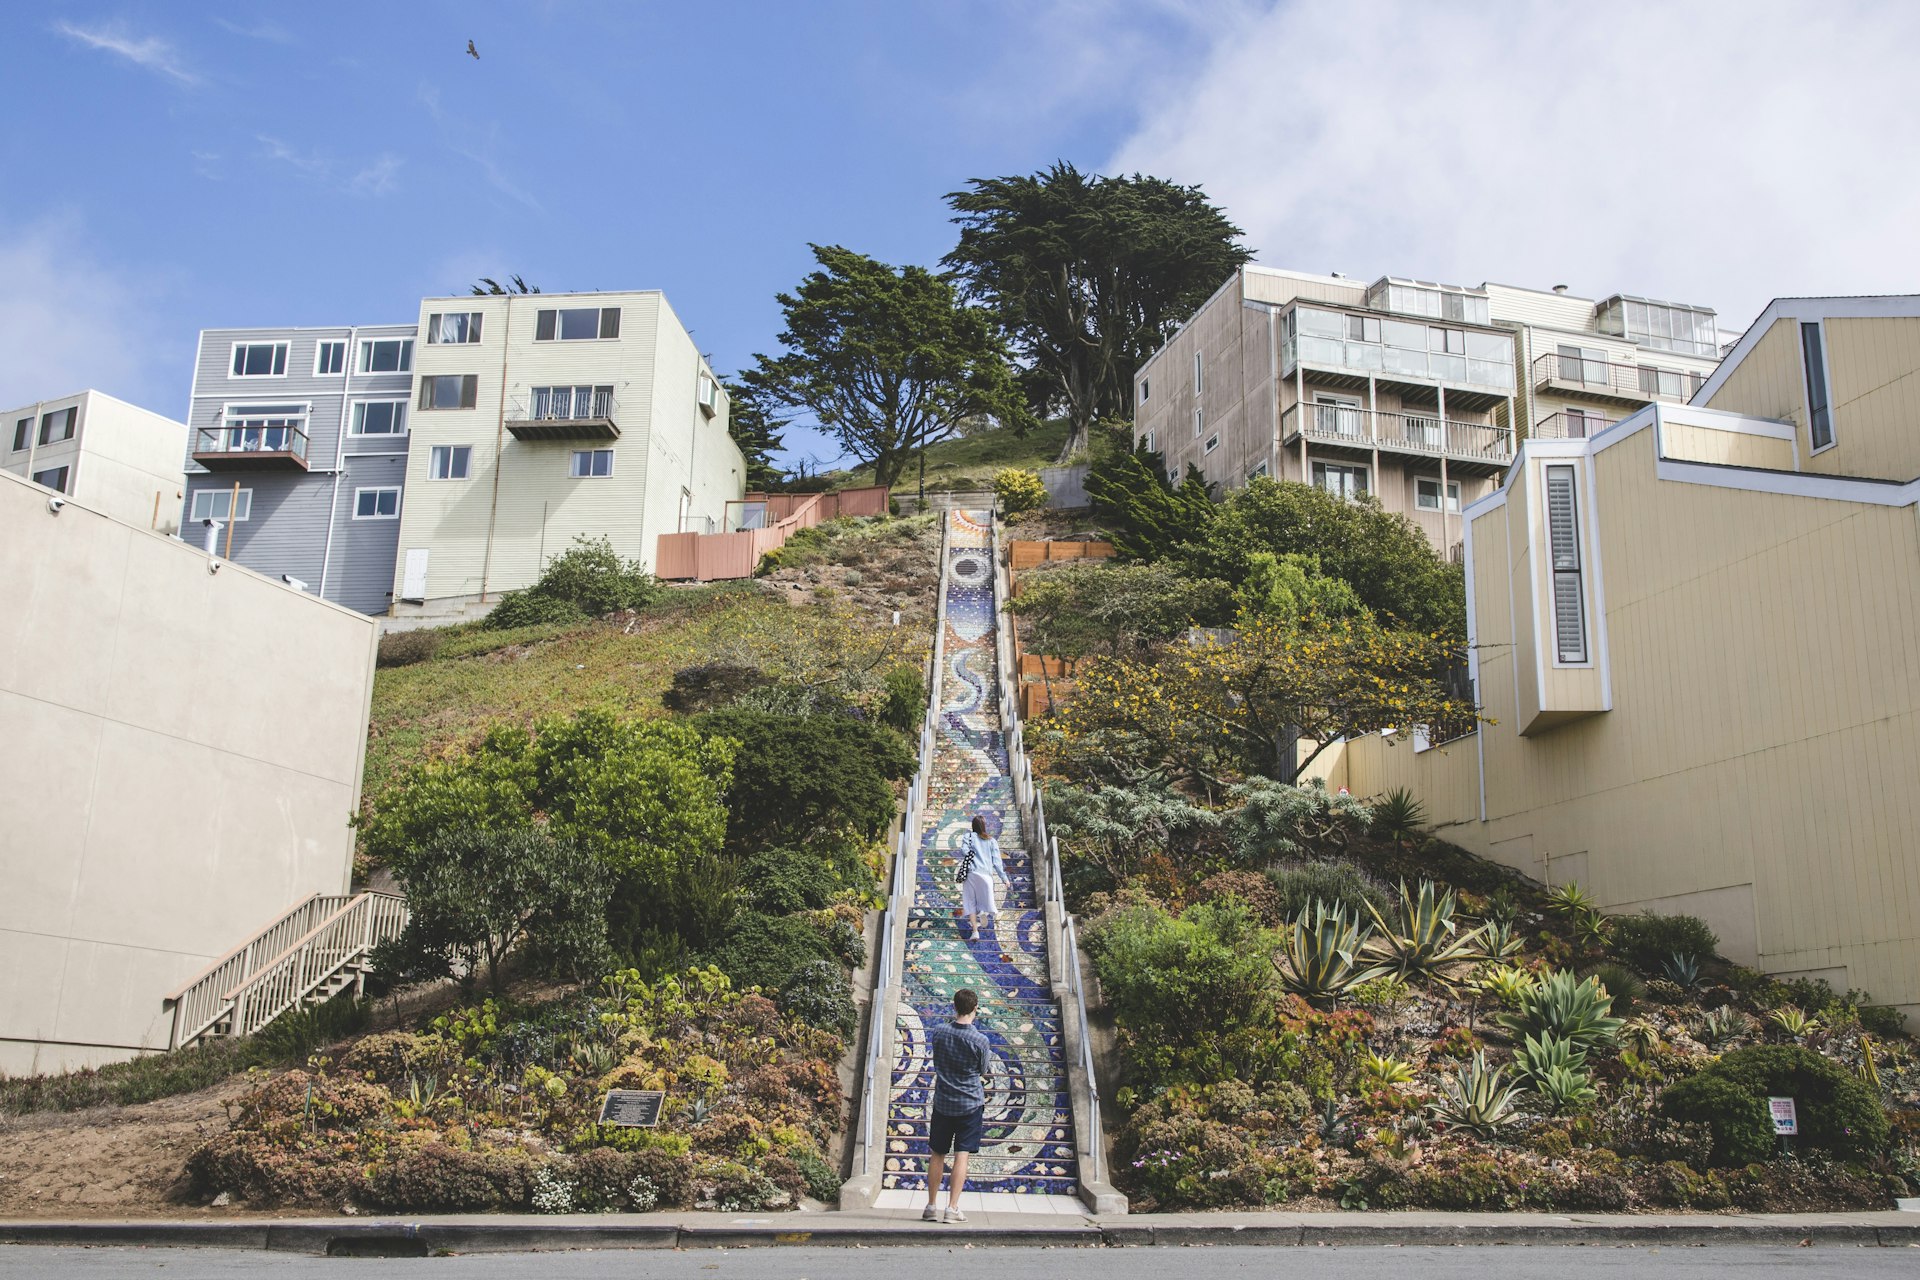 Two people being the long climb up a very high flight of stairs on a hillside in San Francisco, patterned with decorative tiles